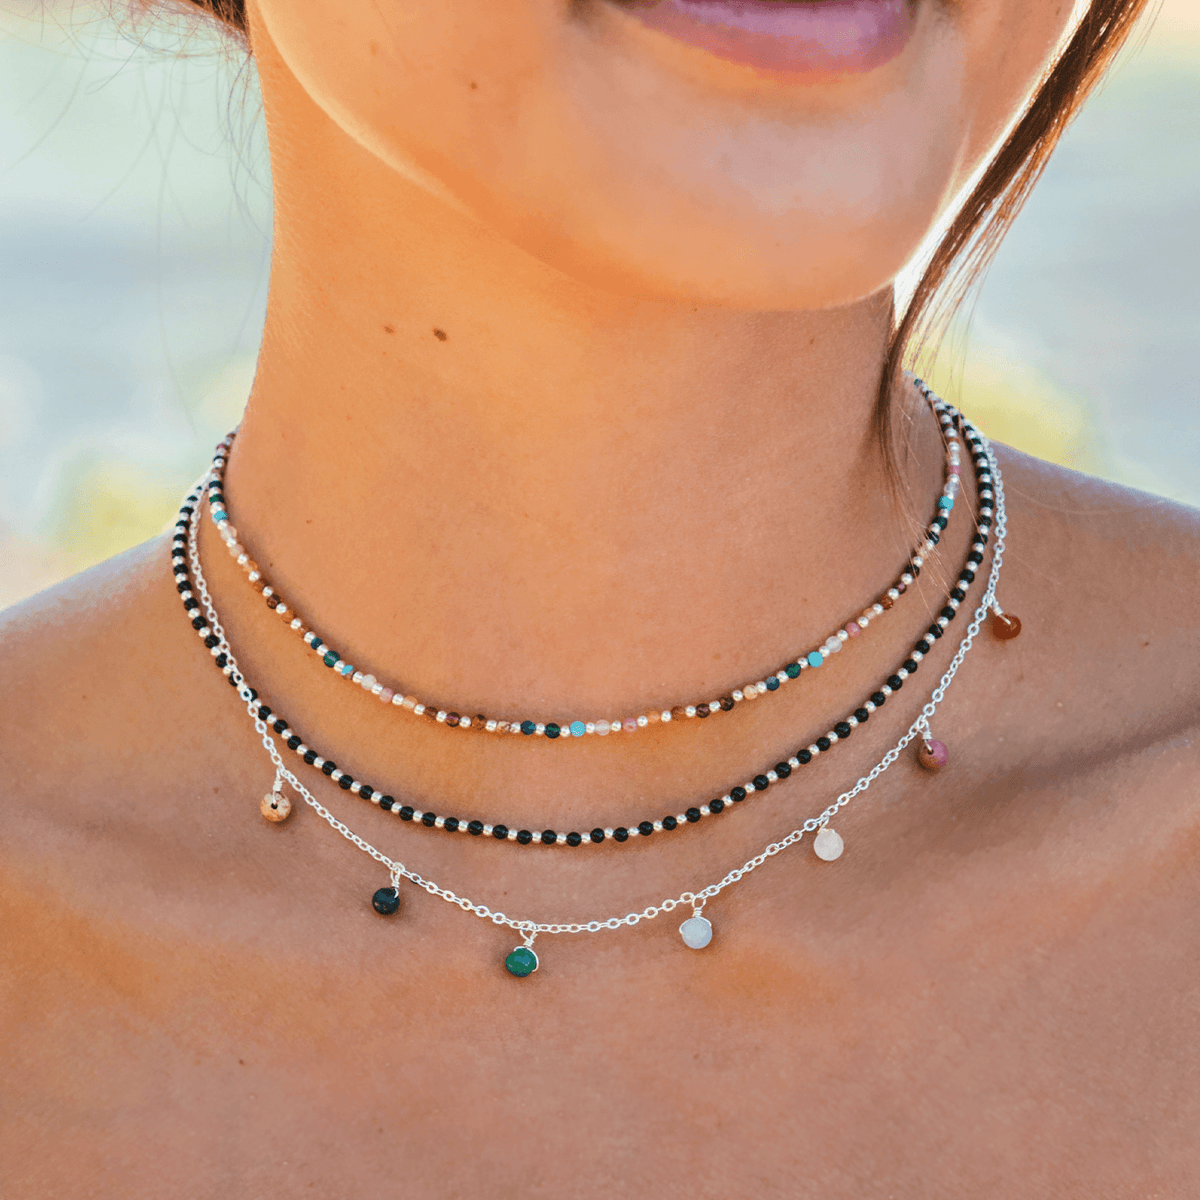 Model wearing a stack of three necklaces. One is a dewdrop charm necklace with multicolor stones and a gold chain, the other is a black stone and gold bead necklace and the last one is a dainty multicolor stone and gold bead necklace